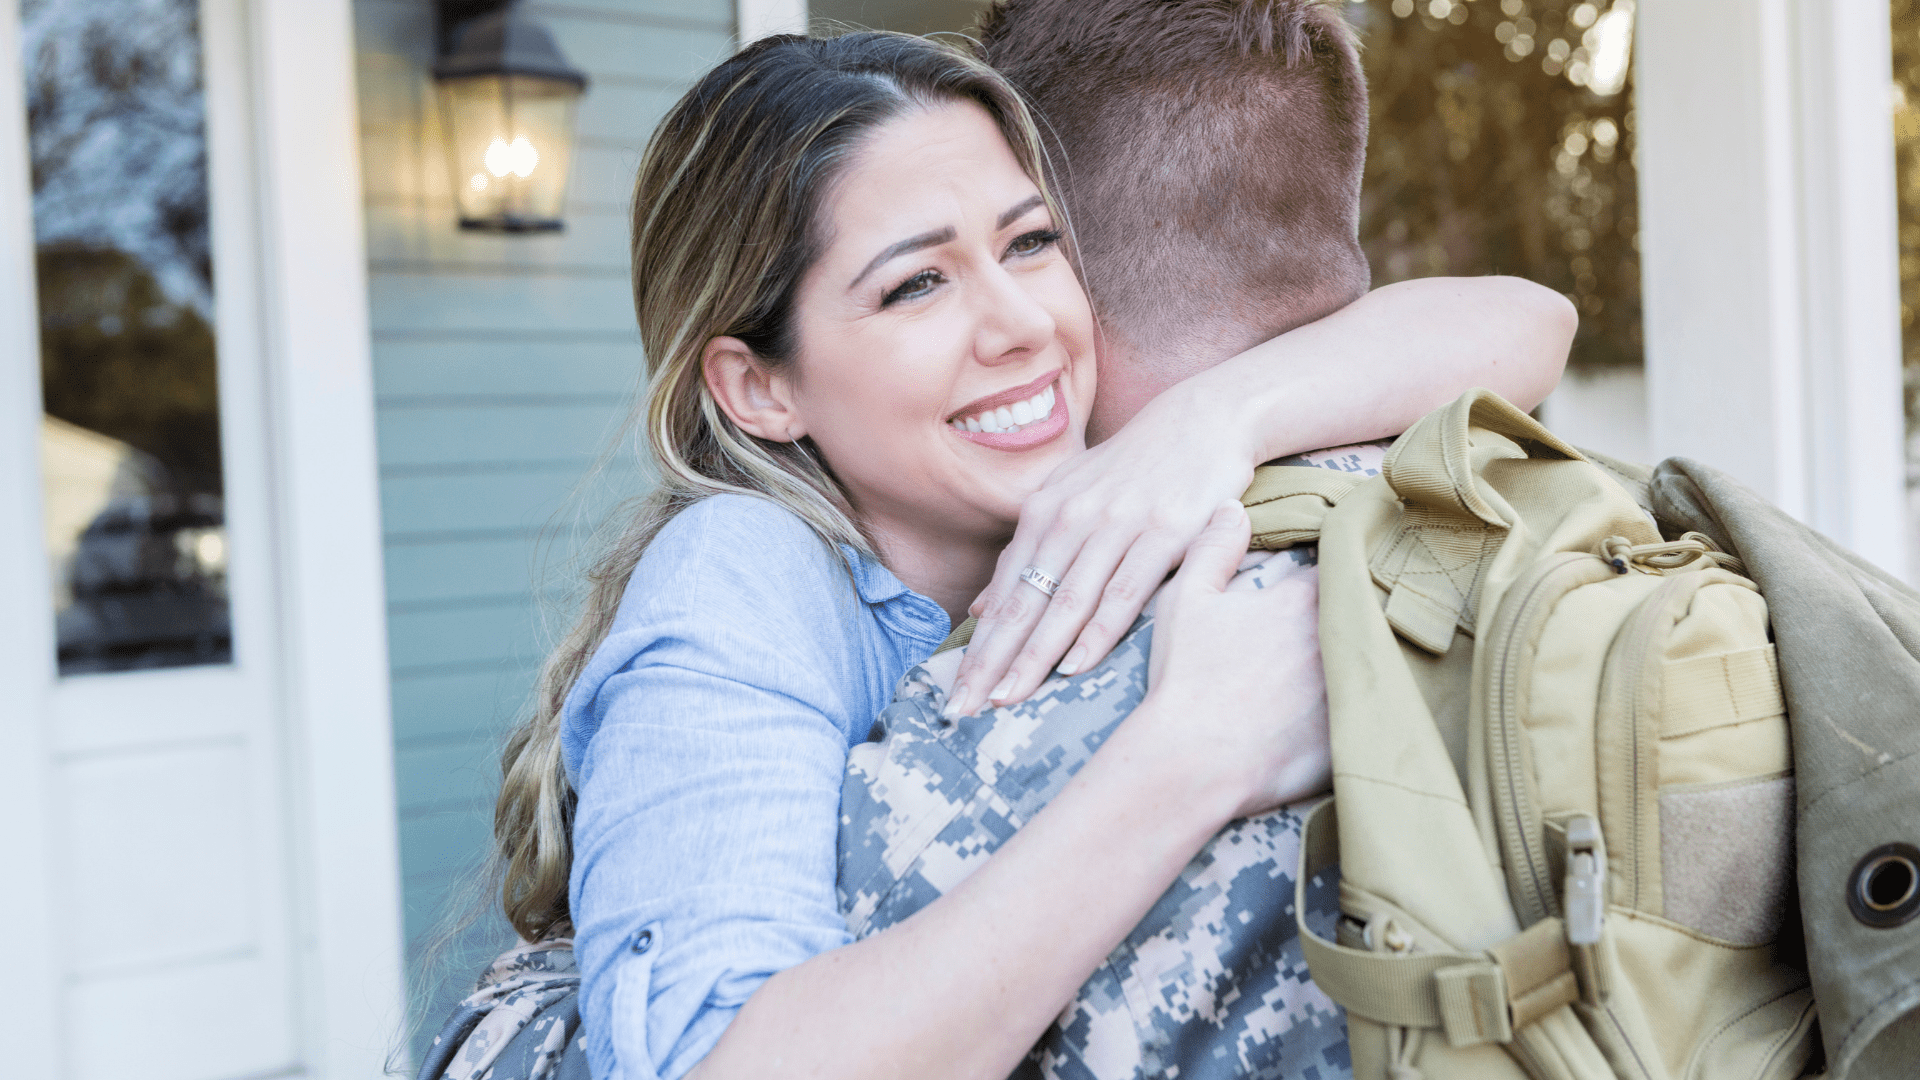 Life Insurance As A Military Spouse